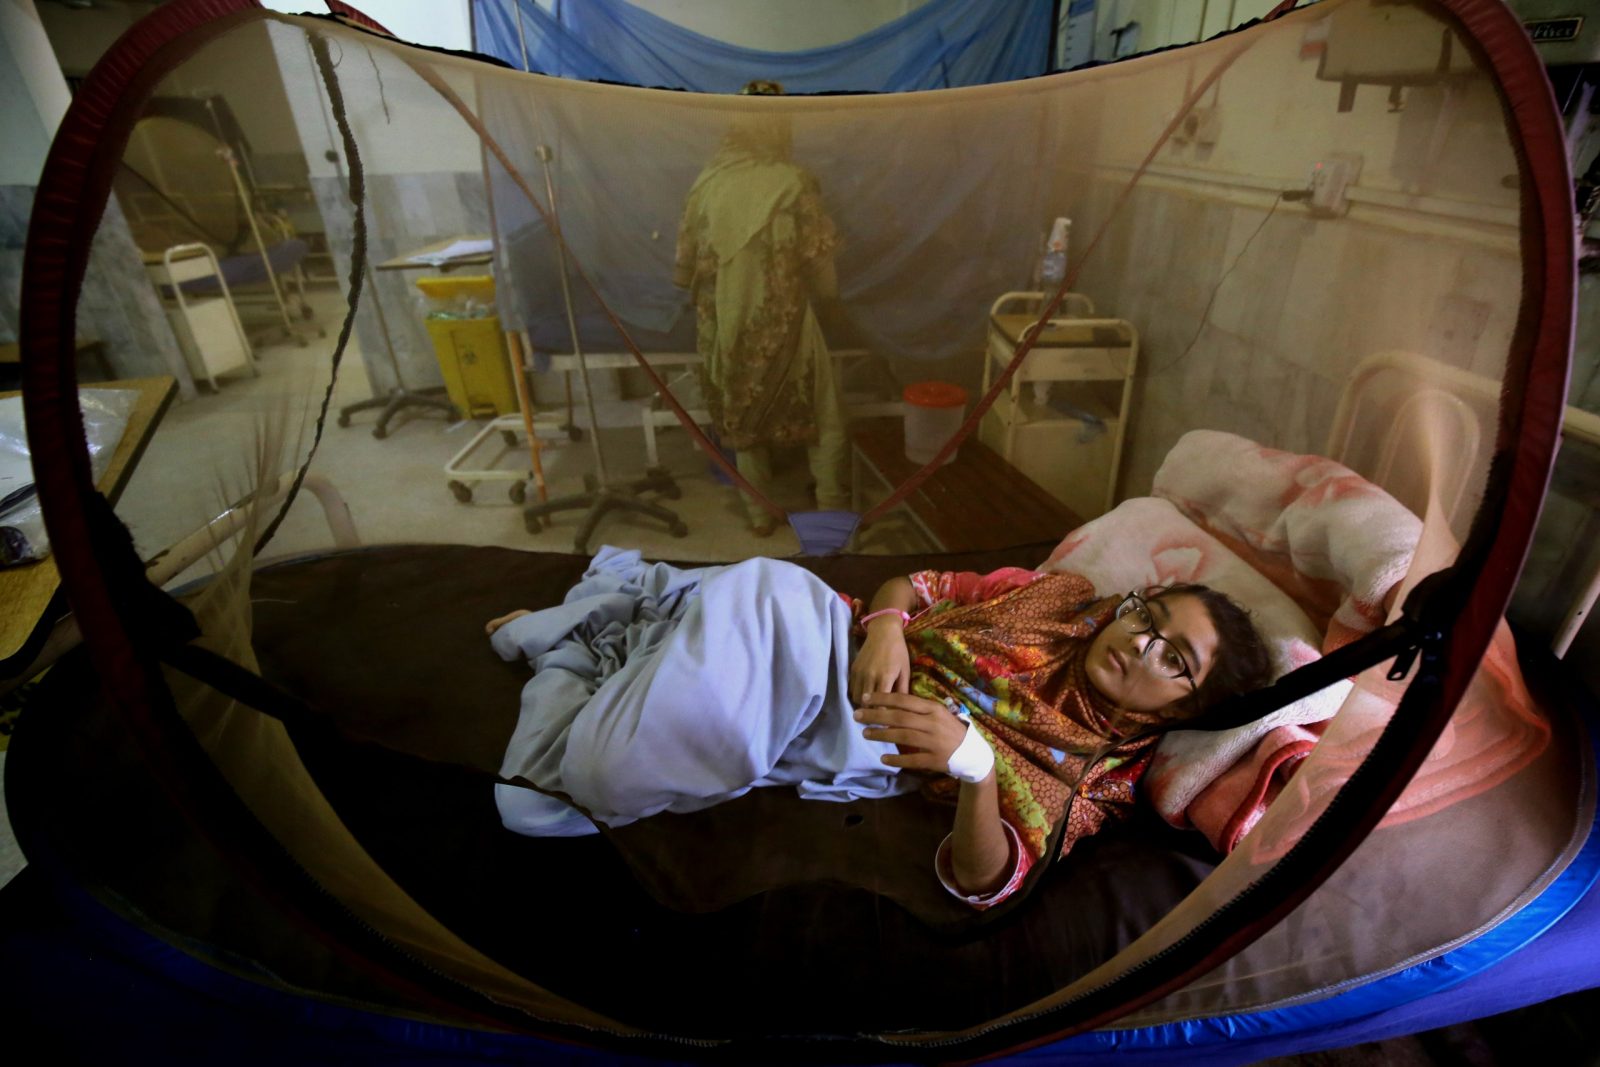 epa10181108 A patient suffering from dengue fever receives medical treatment at an isolation ward of a Lady Reading government hospital in Peshawar, Pakistan, 13 September 2022.  According to the statistics issued by District Health Office (DHO), 373 dengue cases have been reported this season so far. The DHO stated that so far 240 infections were reported from rural areas and 133 from urban areas, amid a continued increase in dengue fever cases, with the numbers in the thousands, and health experts warn the next coming weeks will be critical.  EPA/BILAWAL ARBAB